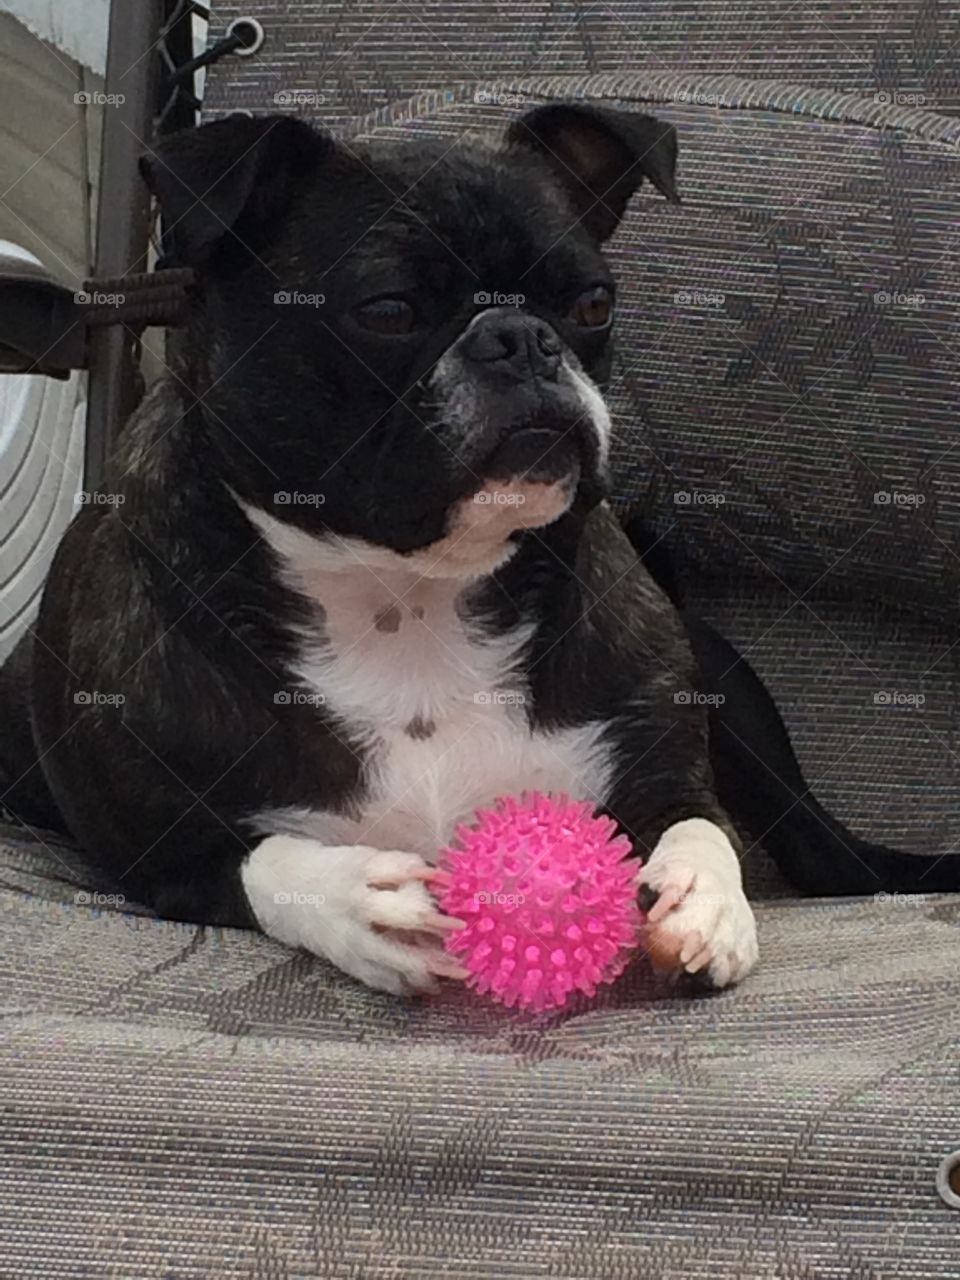 Don't touch my ball! 😜